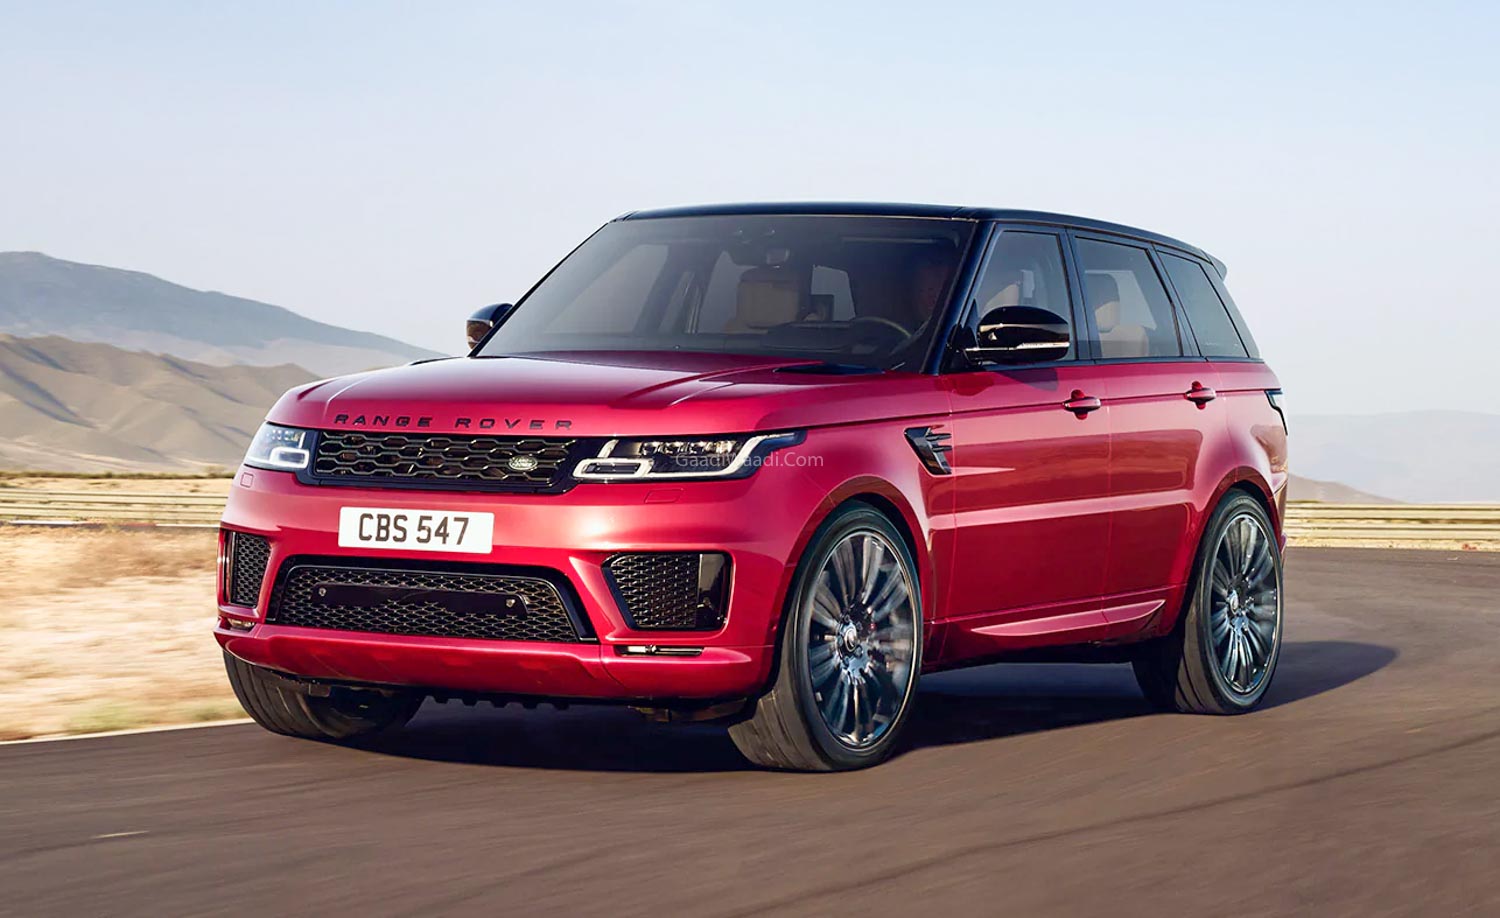 New Range Rover Sport unveiled in India, priced at Rs 1.64 crore